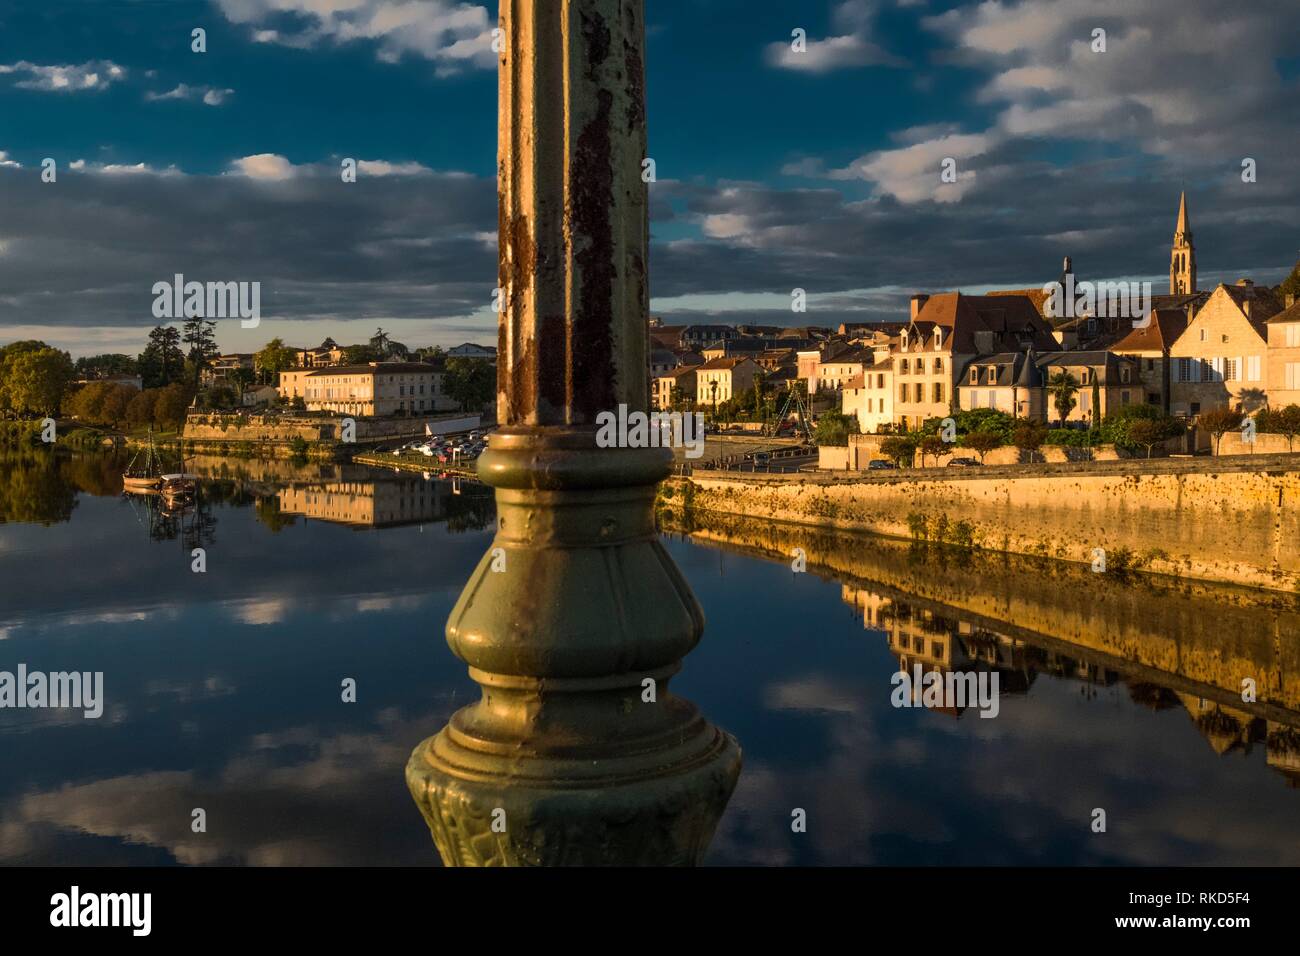 France, Nouvelle Aquitaine, Dordogne, the town of Bergerac on the Dordogne river. Stock Photo